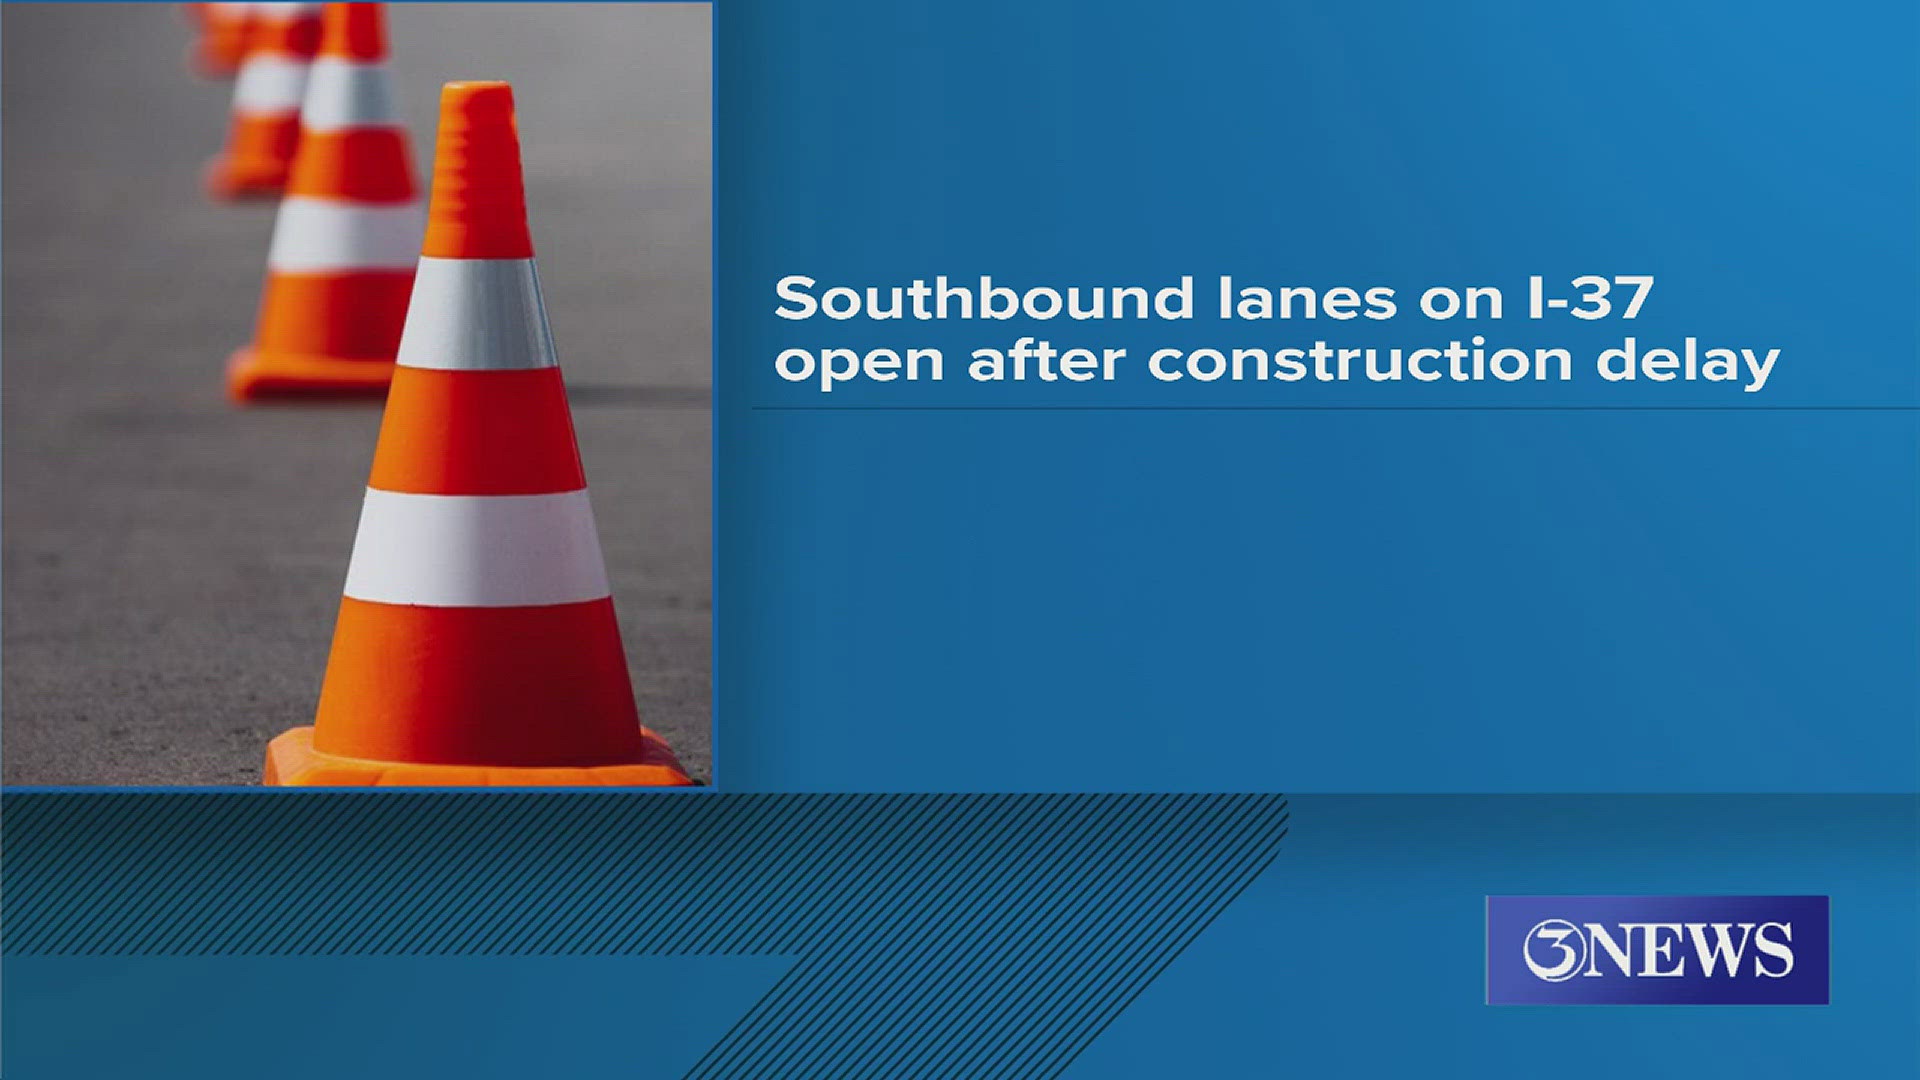 TxDOT officials told 3NEWS contractors ran into unexpected complications, pushing the reopening of the lanes to later as they continued the work.